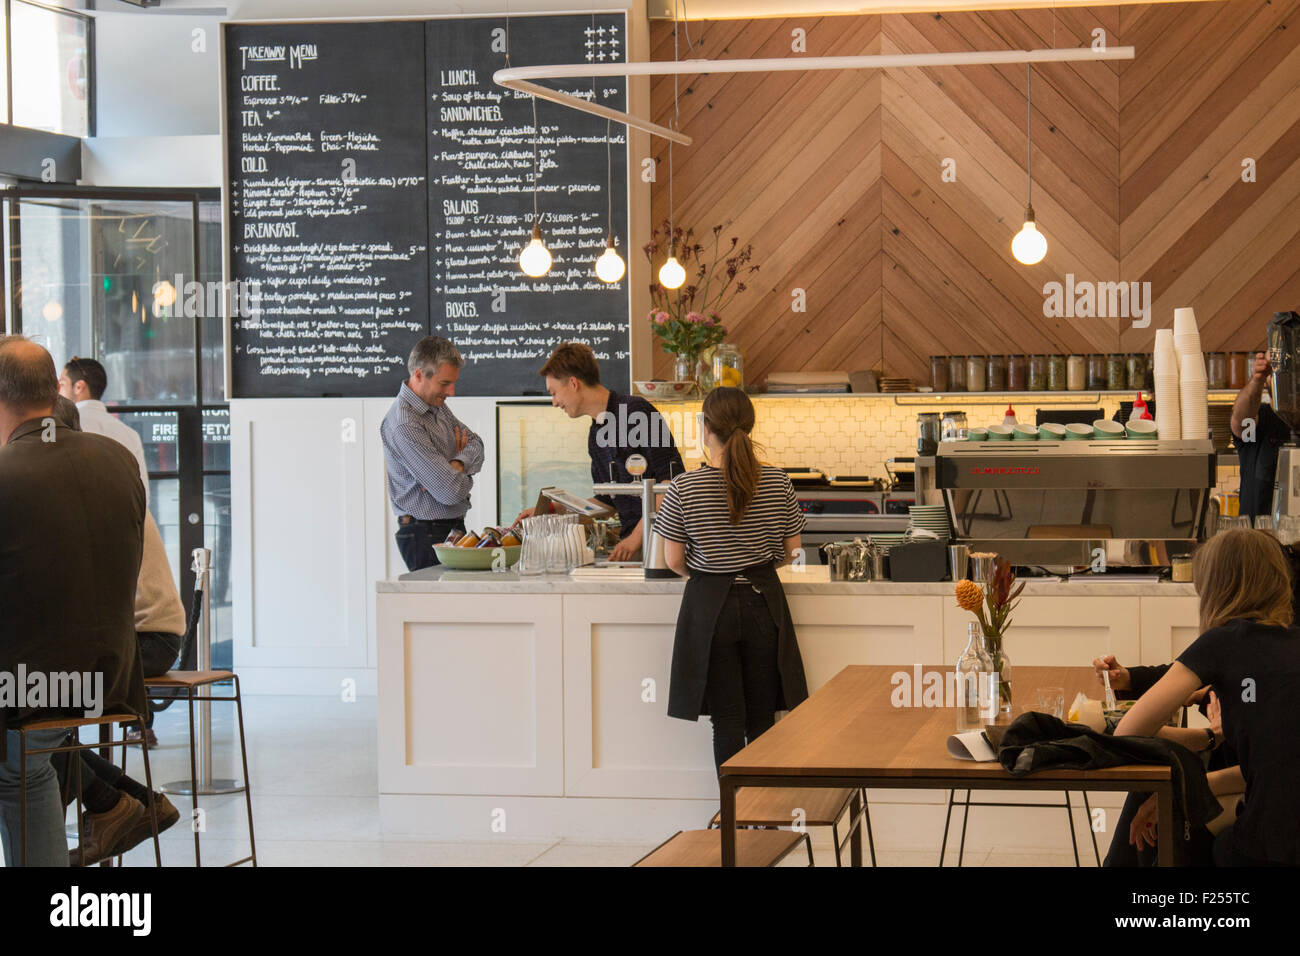 Interior of an australian coffee shop in the foyer of an office building,Sydney,Australia Stock Photo